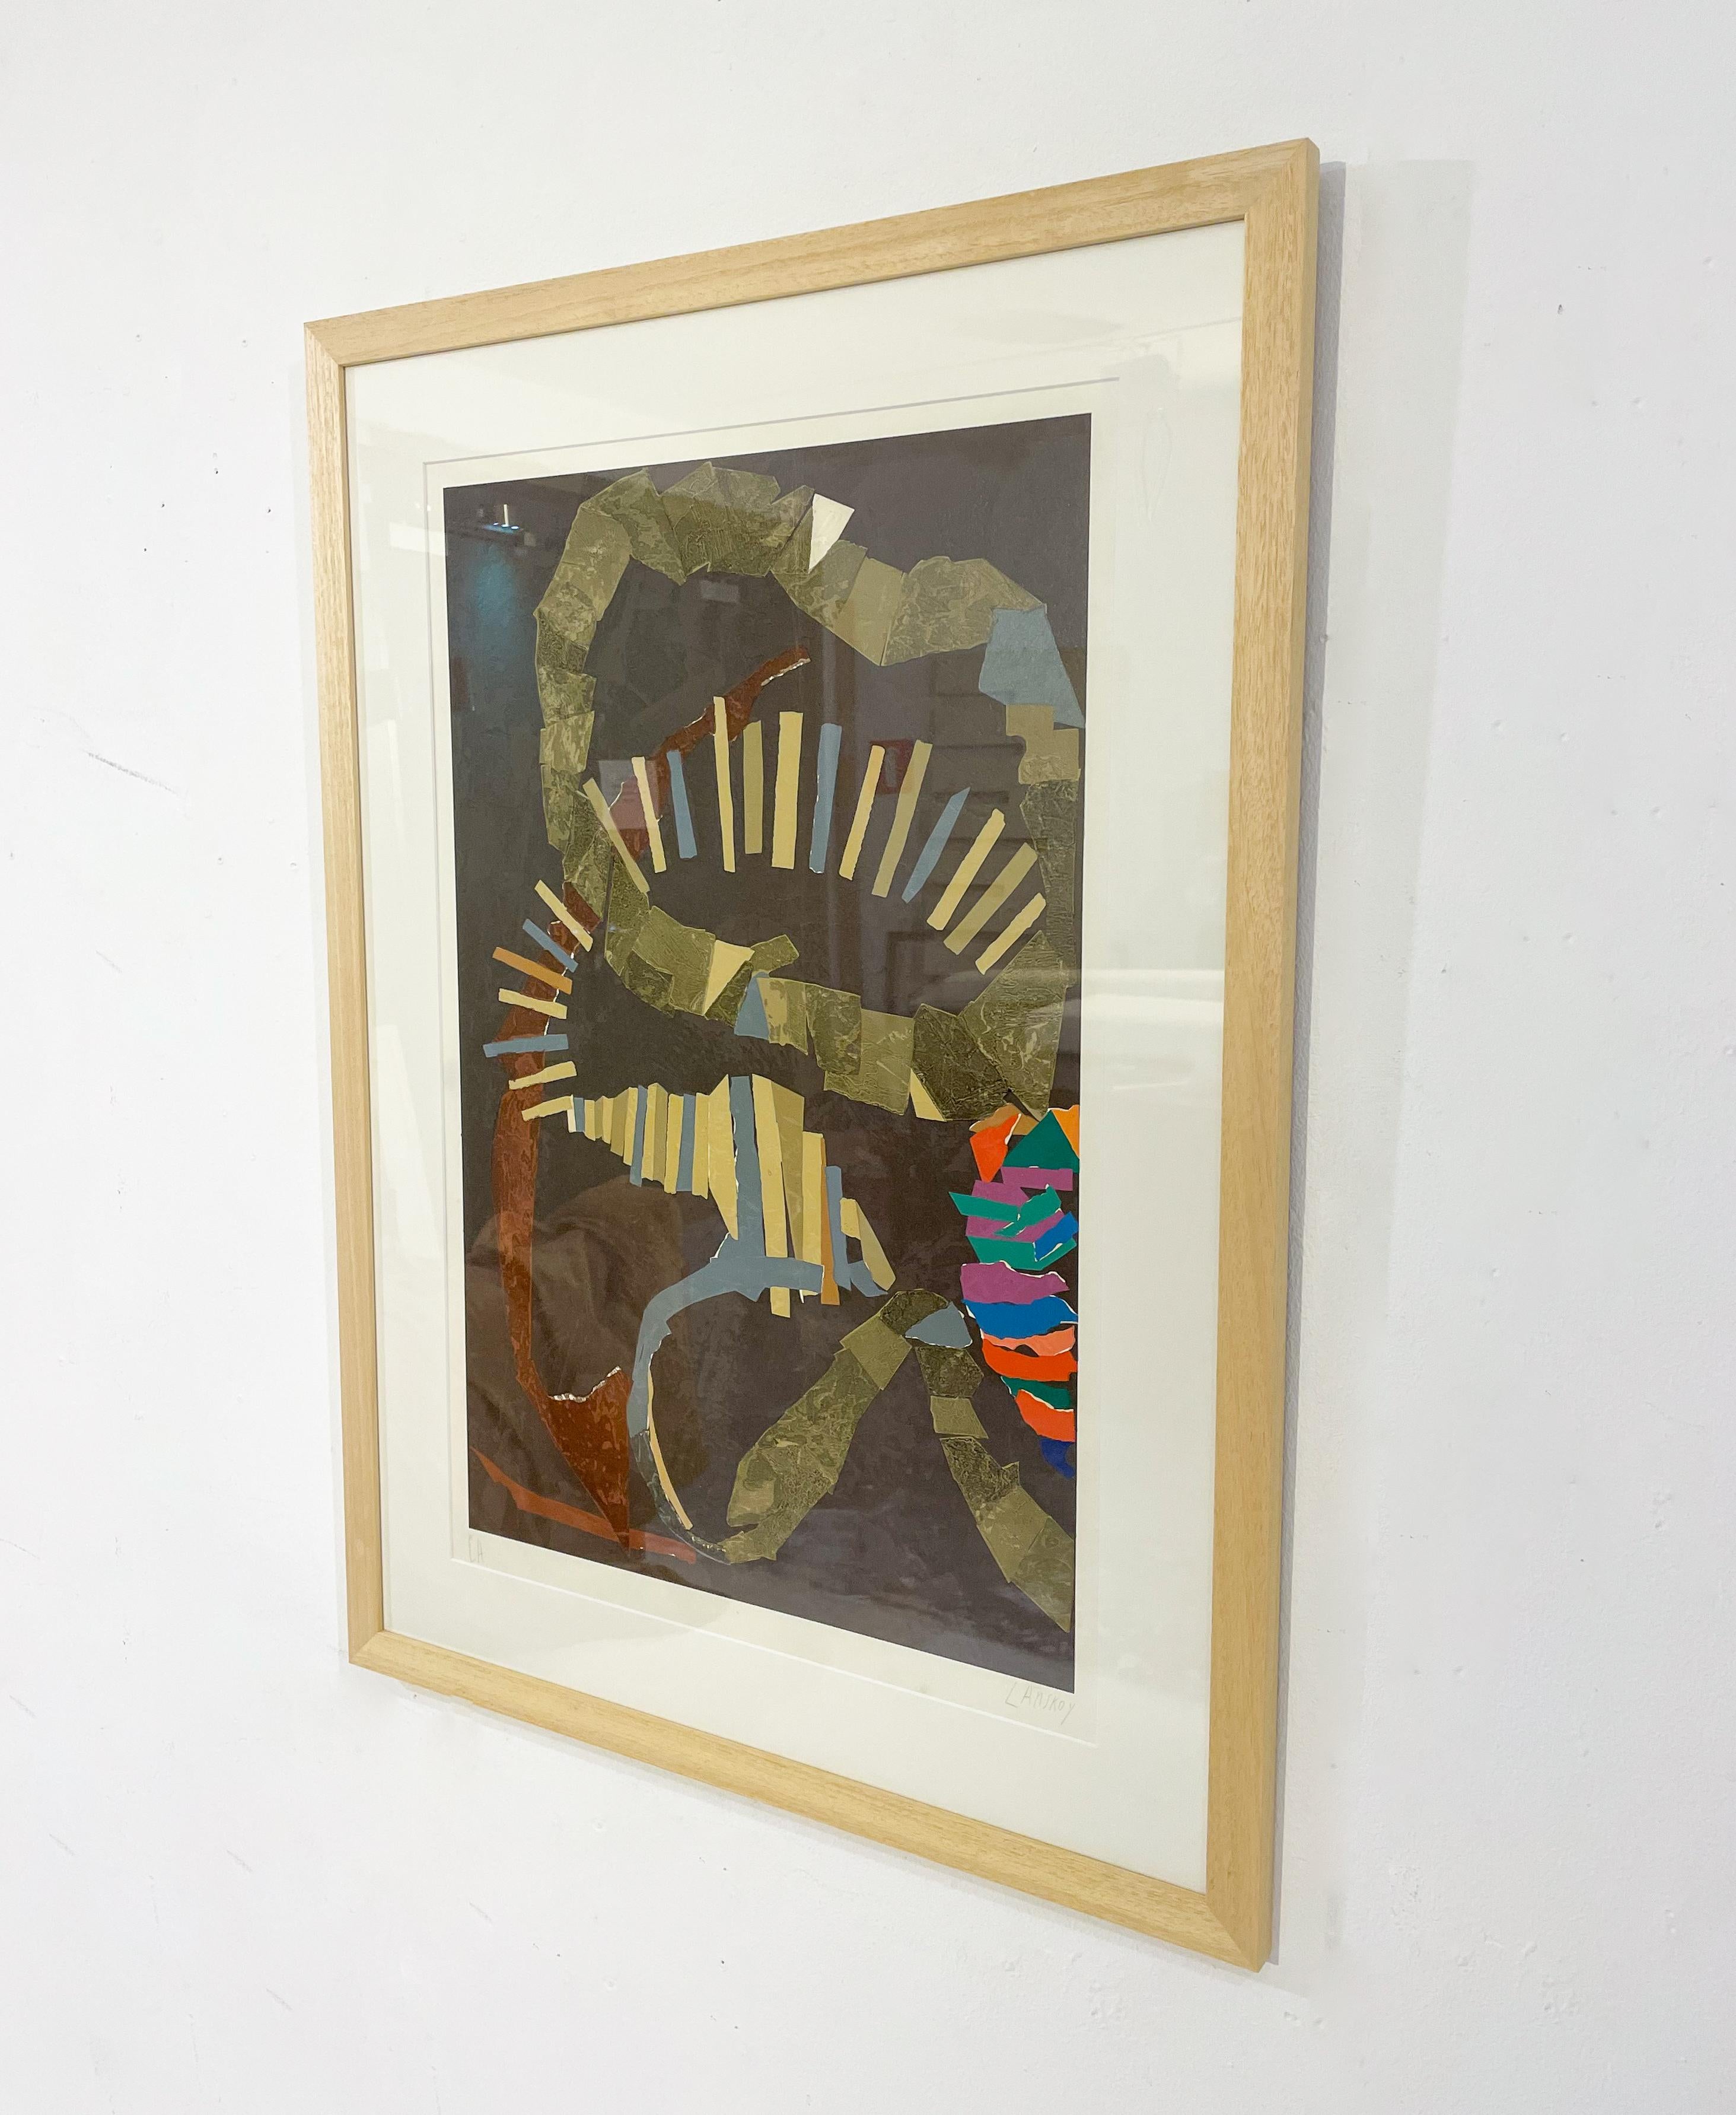 Mid-Century Modern Framed Lithography by André Lanskoy, 1970s - Signed